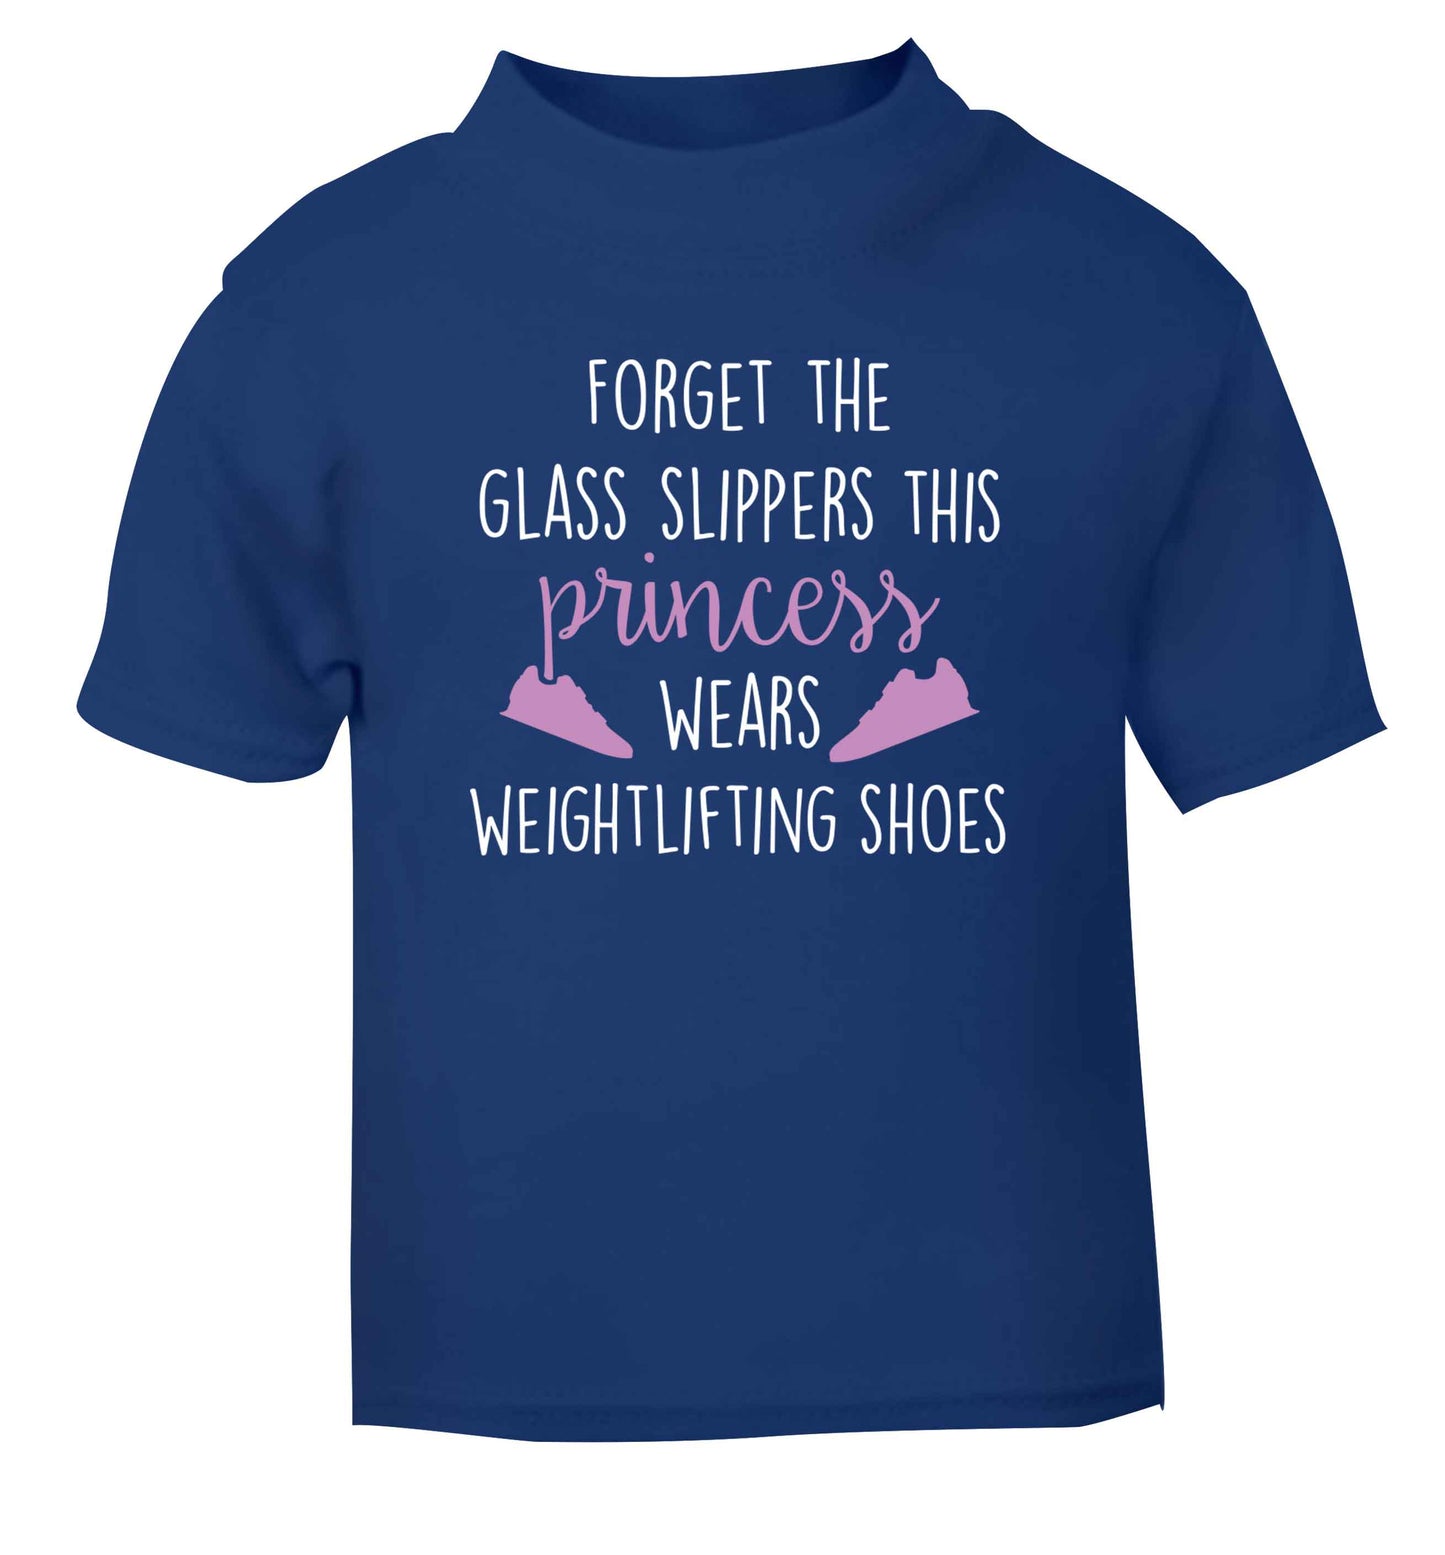 Forget the glass slippers this princess wears weightlifting shoes blue Baby Toddler Tshirt 2 Years